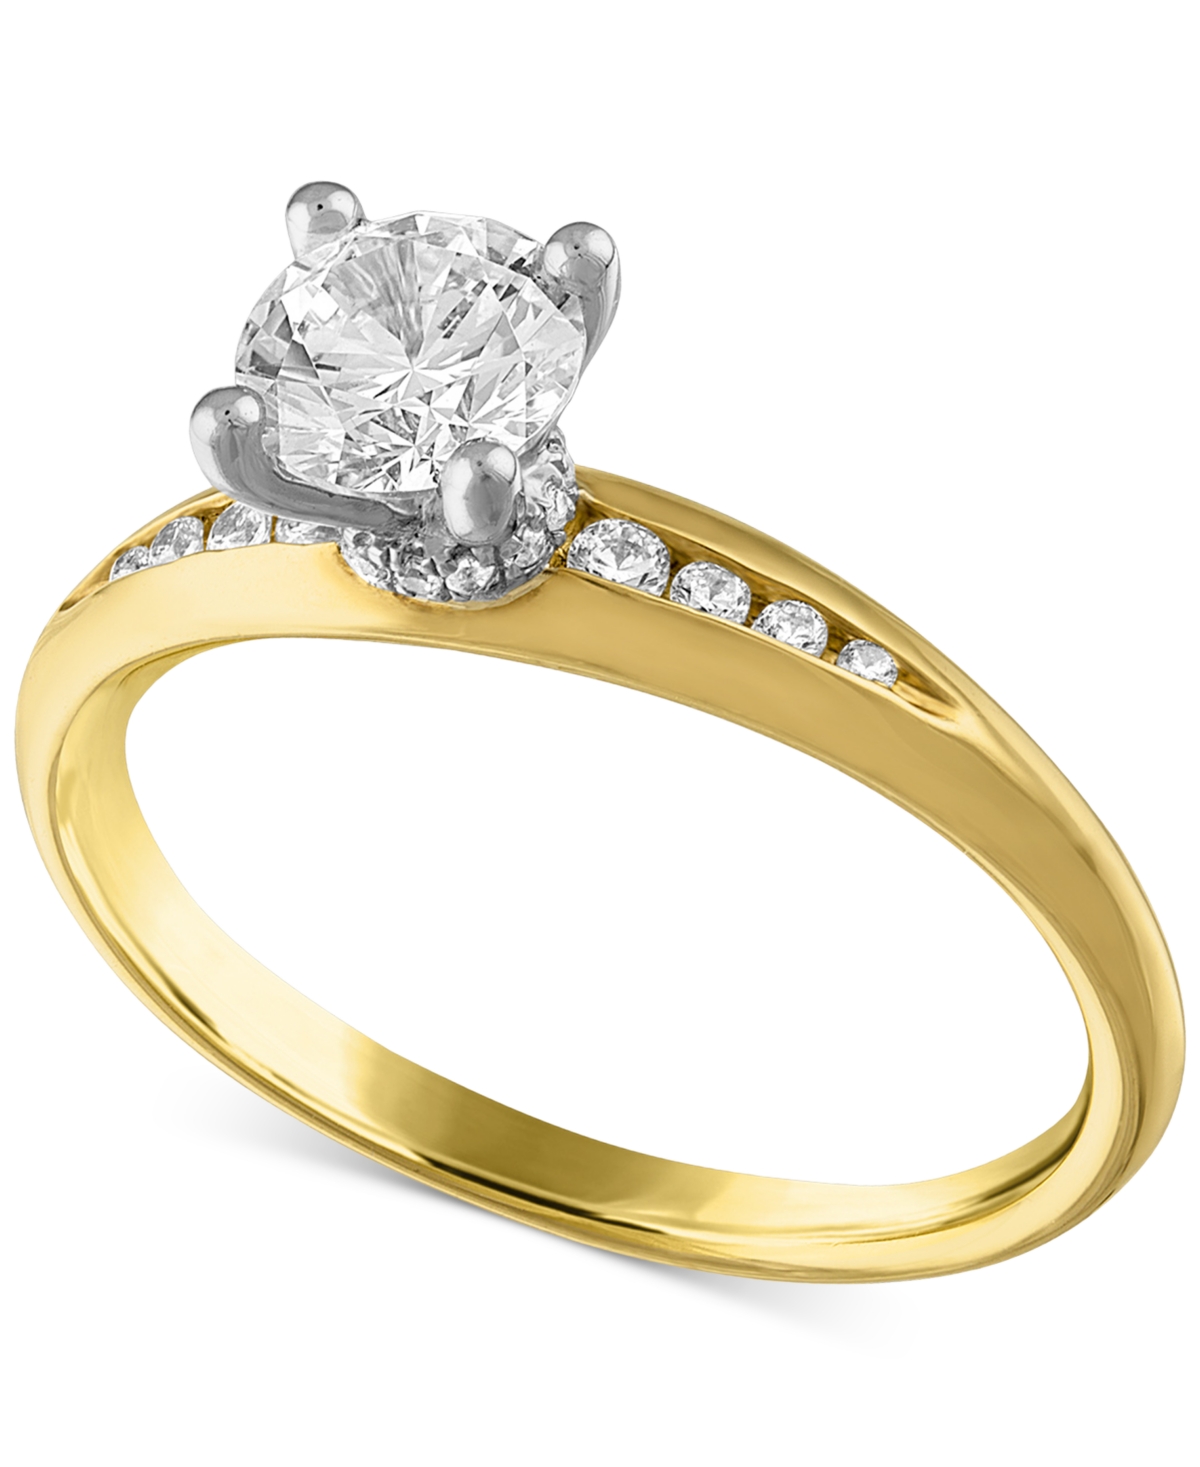 Certified Round Engagement Ring (7/8 ct. t.w.) in 14k Two-Tone Gold Featuring Diamonds from De Beers Code of Origin, Created for Macy's - Yell